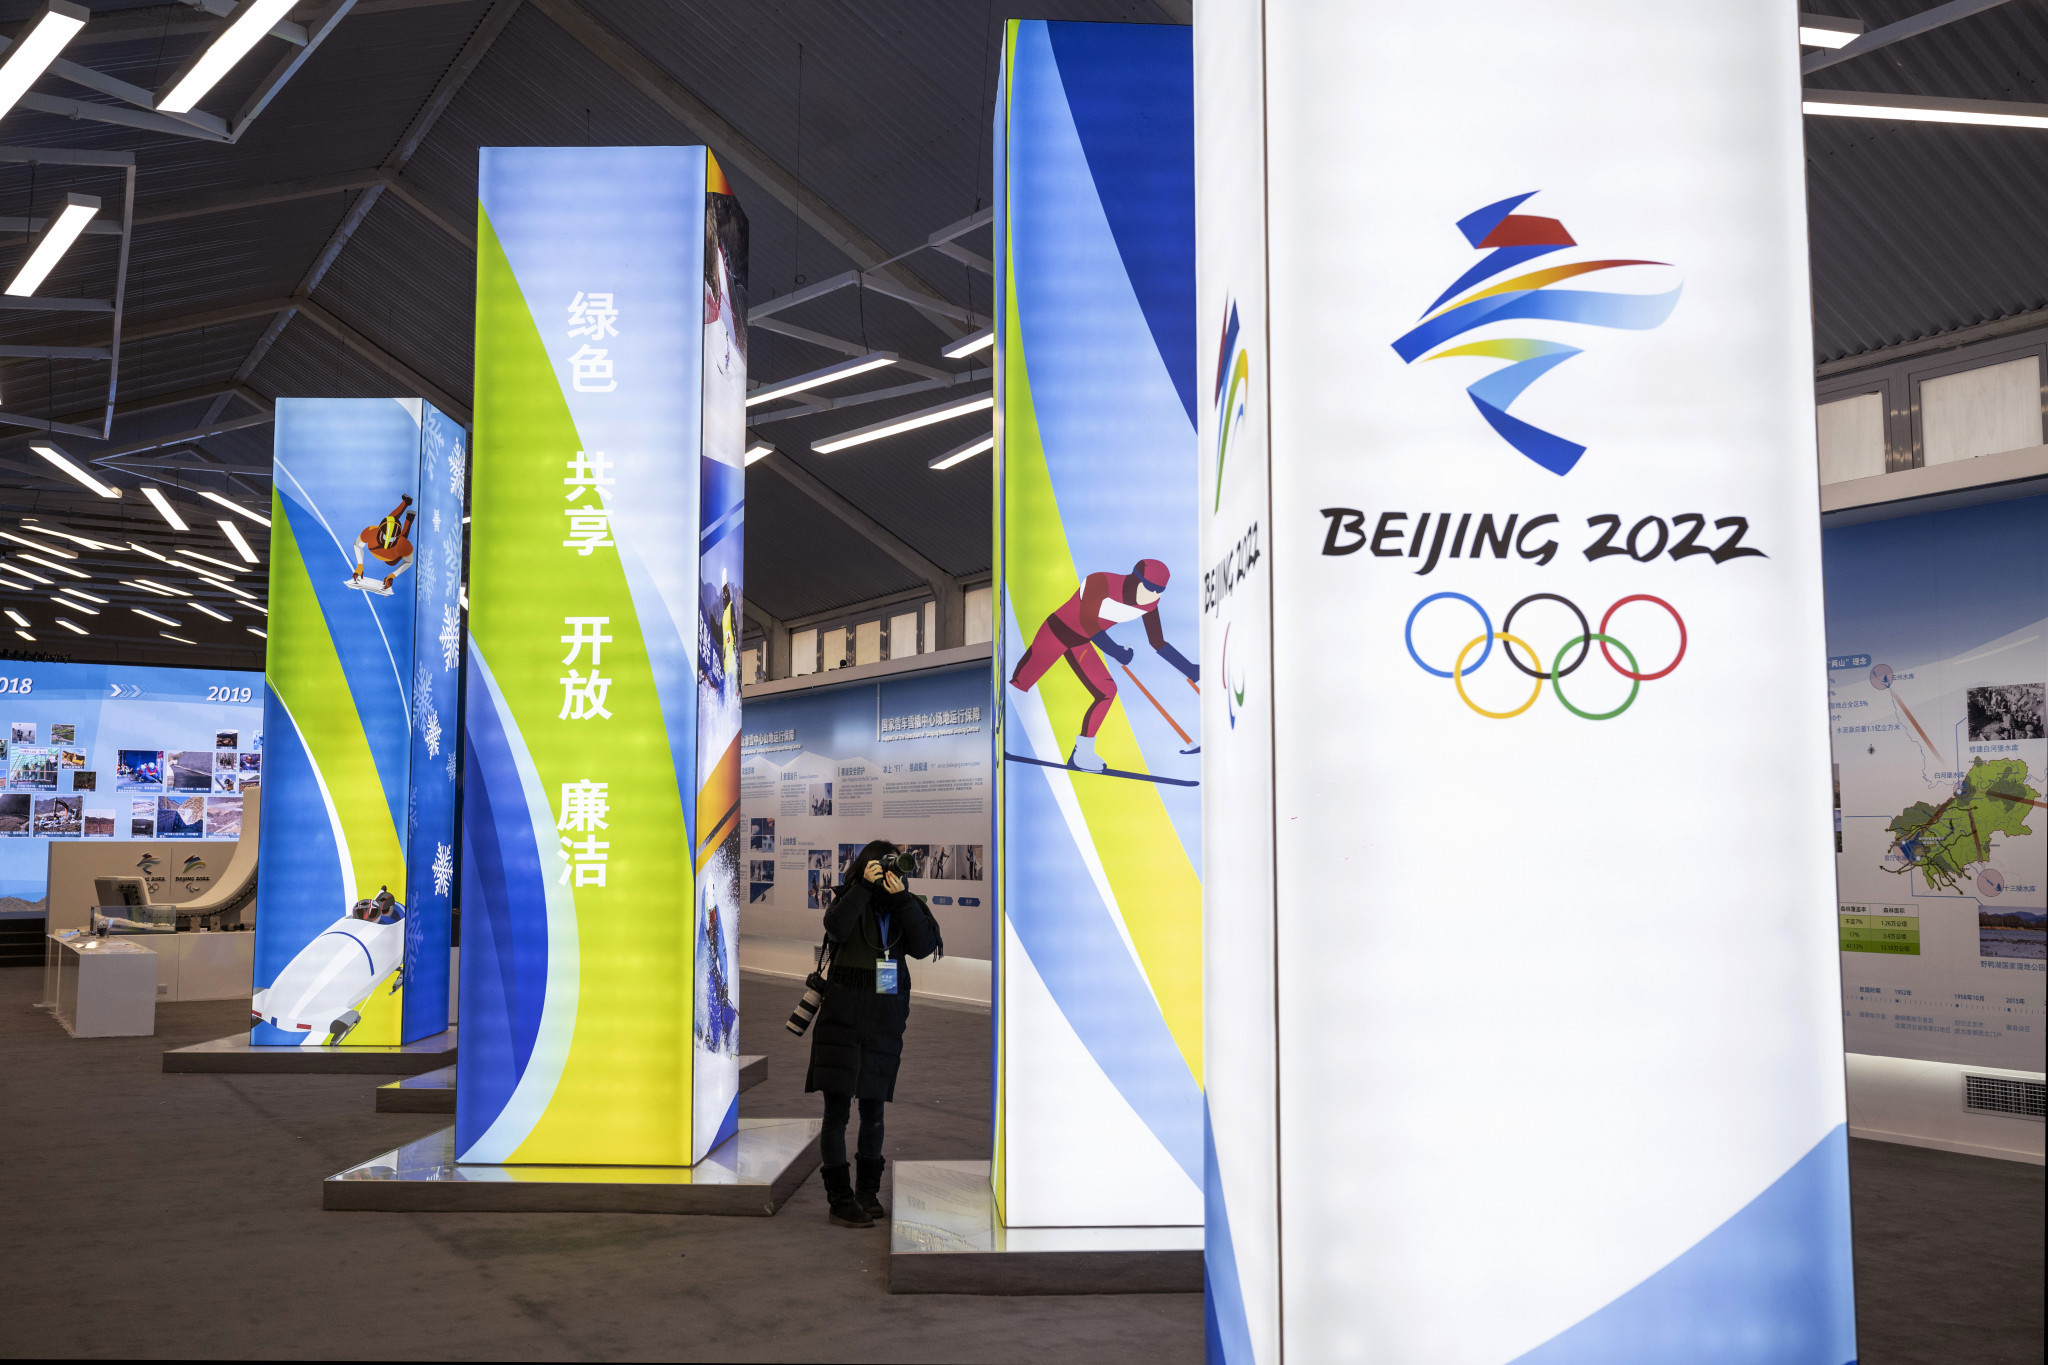 Beijing 2022 organisers say all venues will be ready well ahead of the Games, with the coronavirus pandemic causing little disruption ©Getty Images